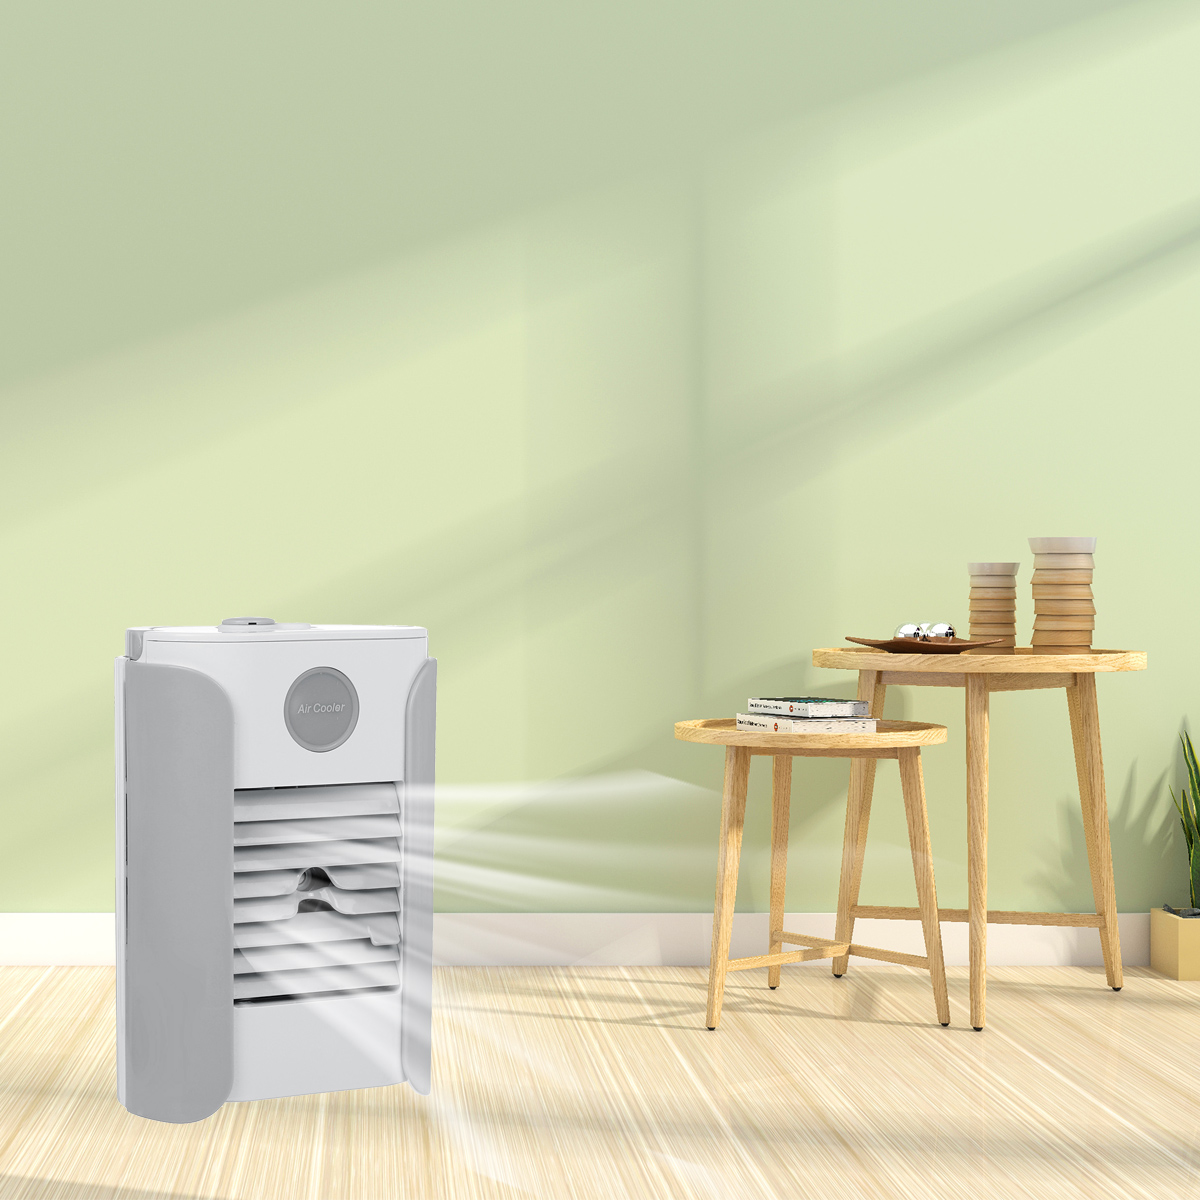 Multifunction-Humidifier-Portable-Air-Cooler-Cool-Conditioner-Conditioning-Fan-1715755-4